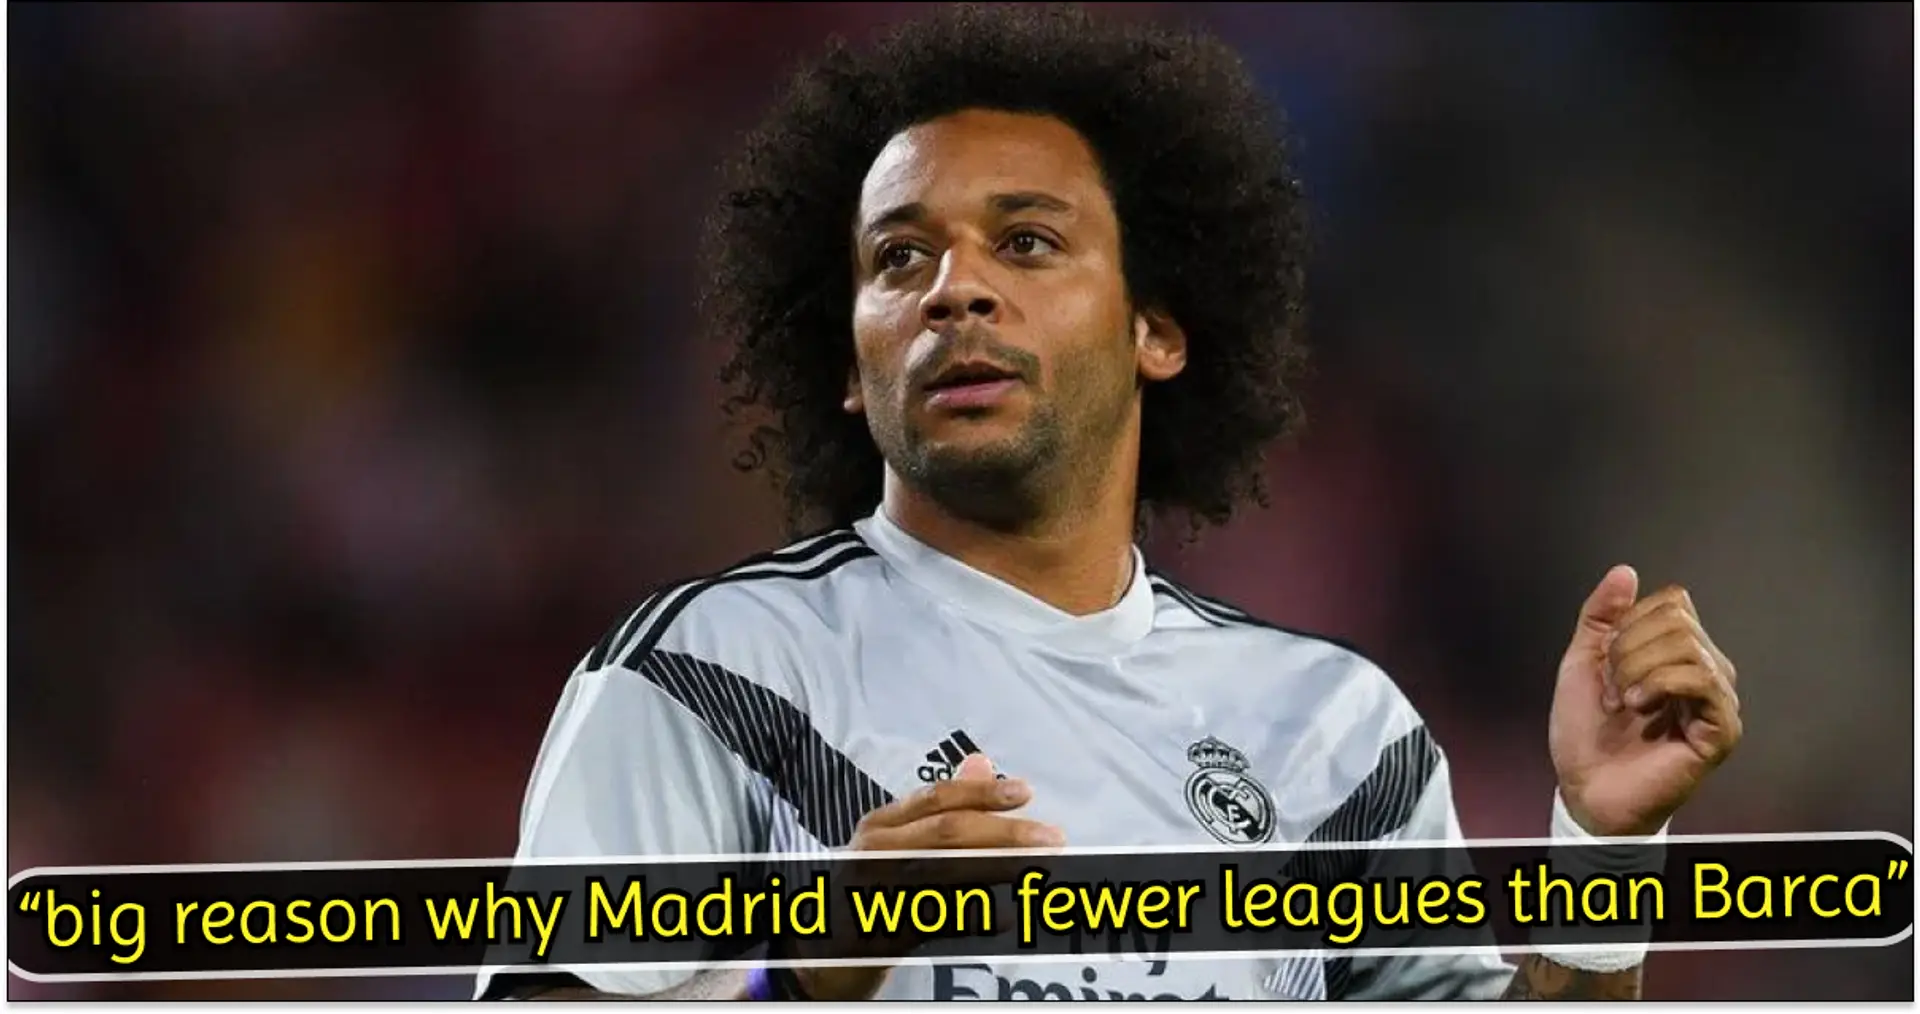 Marcelo told he's 'most overrated player' in the world — Madrid fans jump to legend's defence